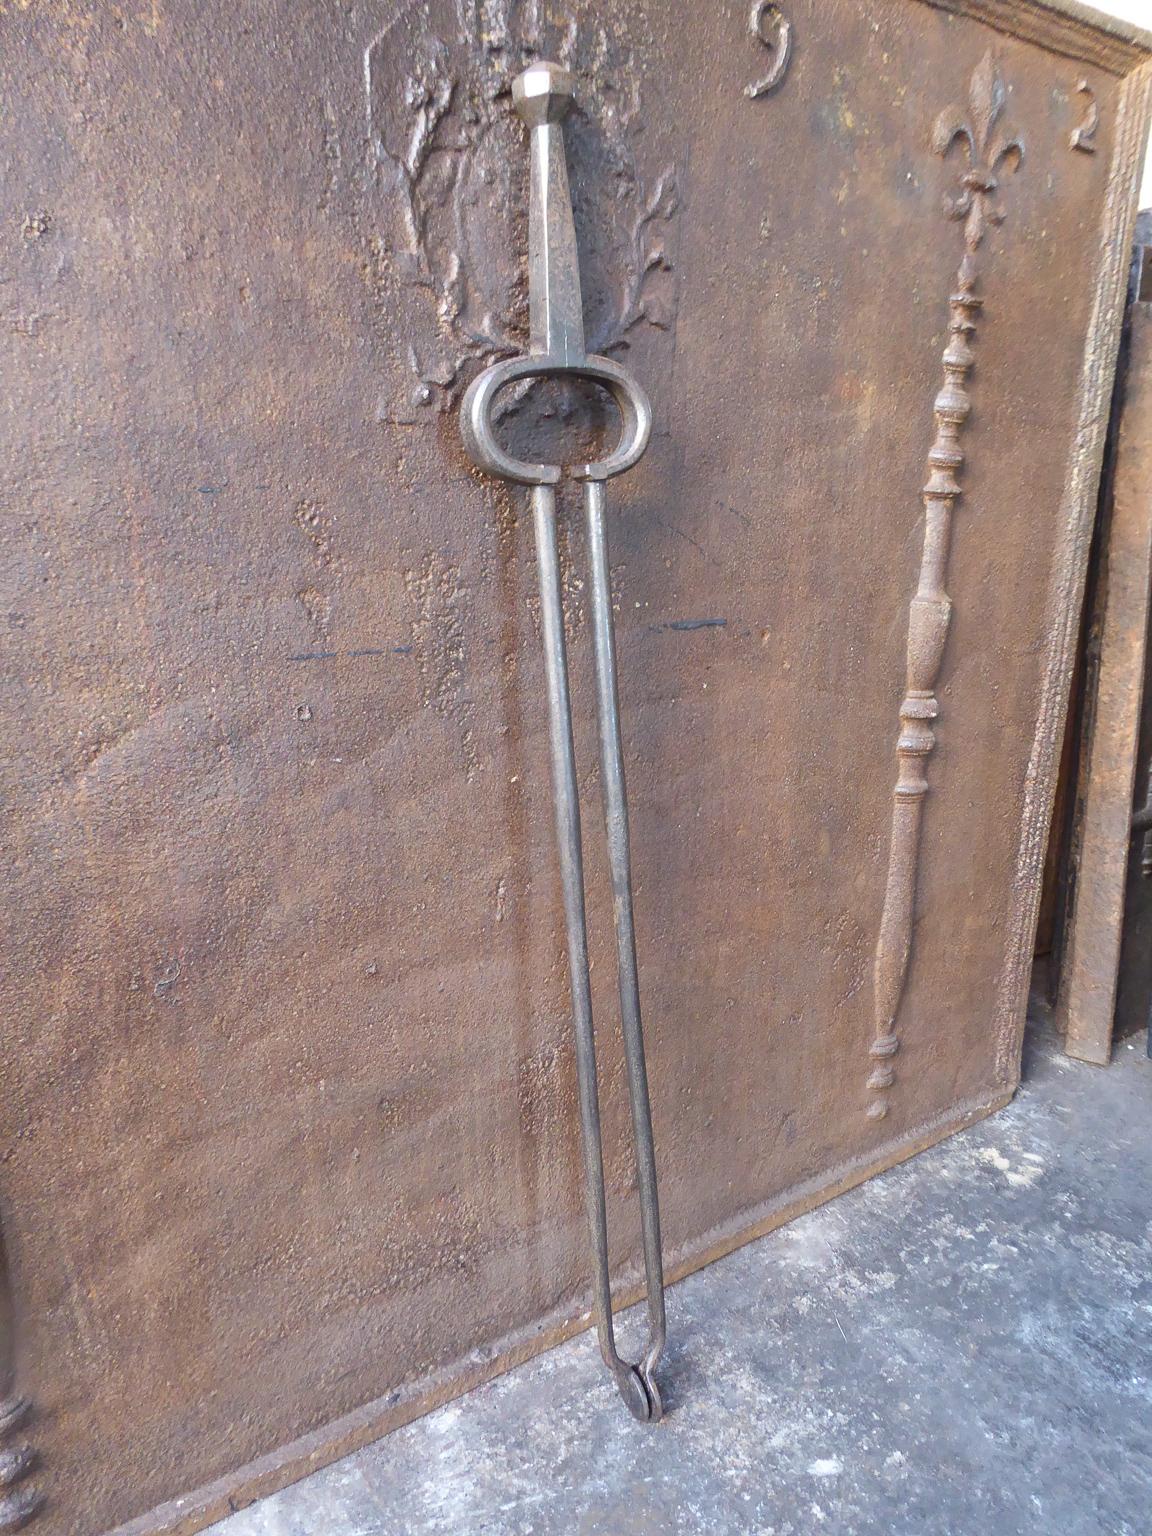 18th-19th century Dutch fireplace tongs made of wrought iron. With 33.5 inch (85 cm) height, this is a large pair.